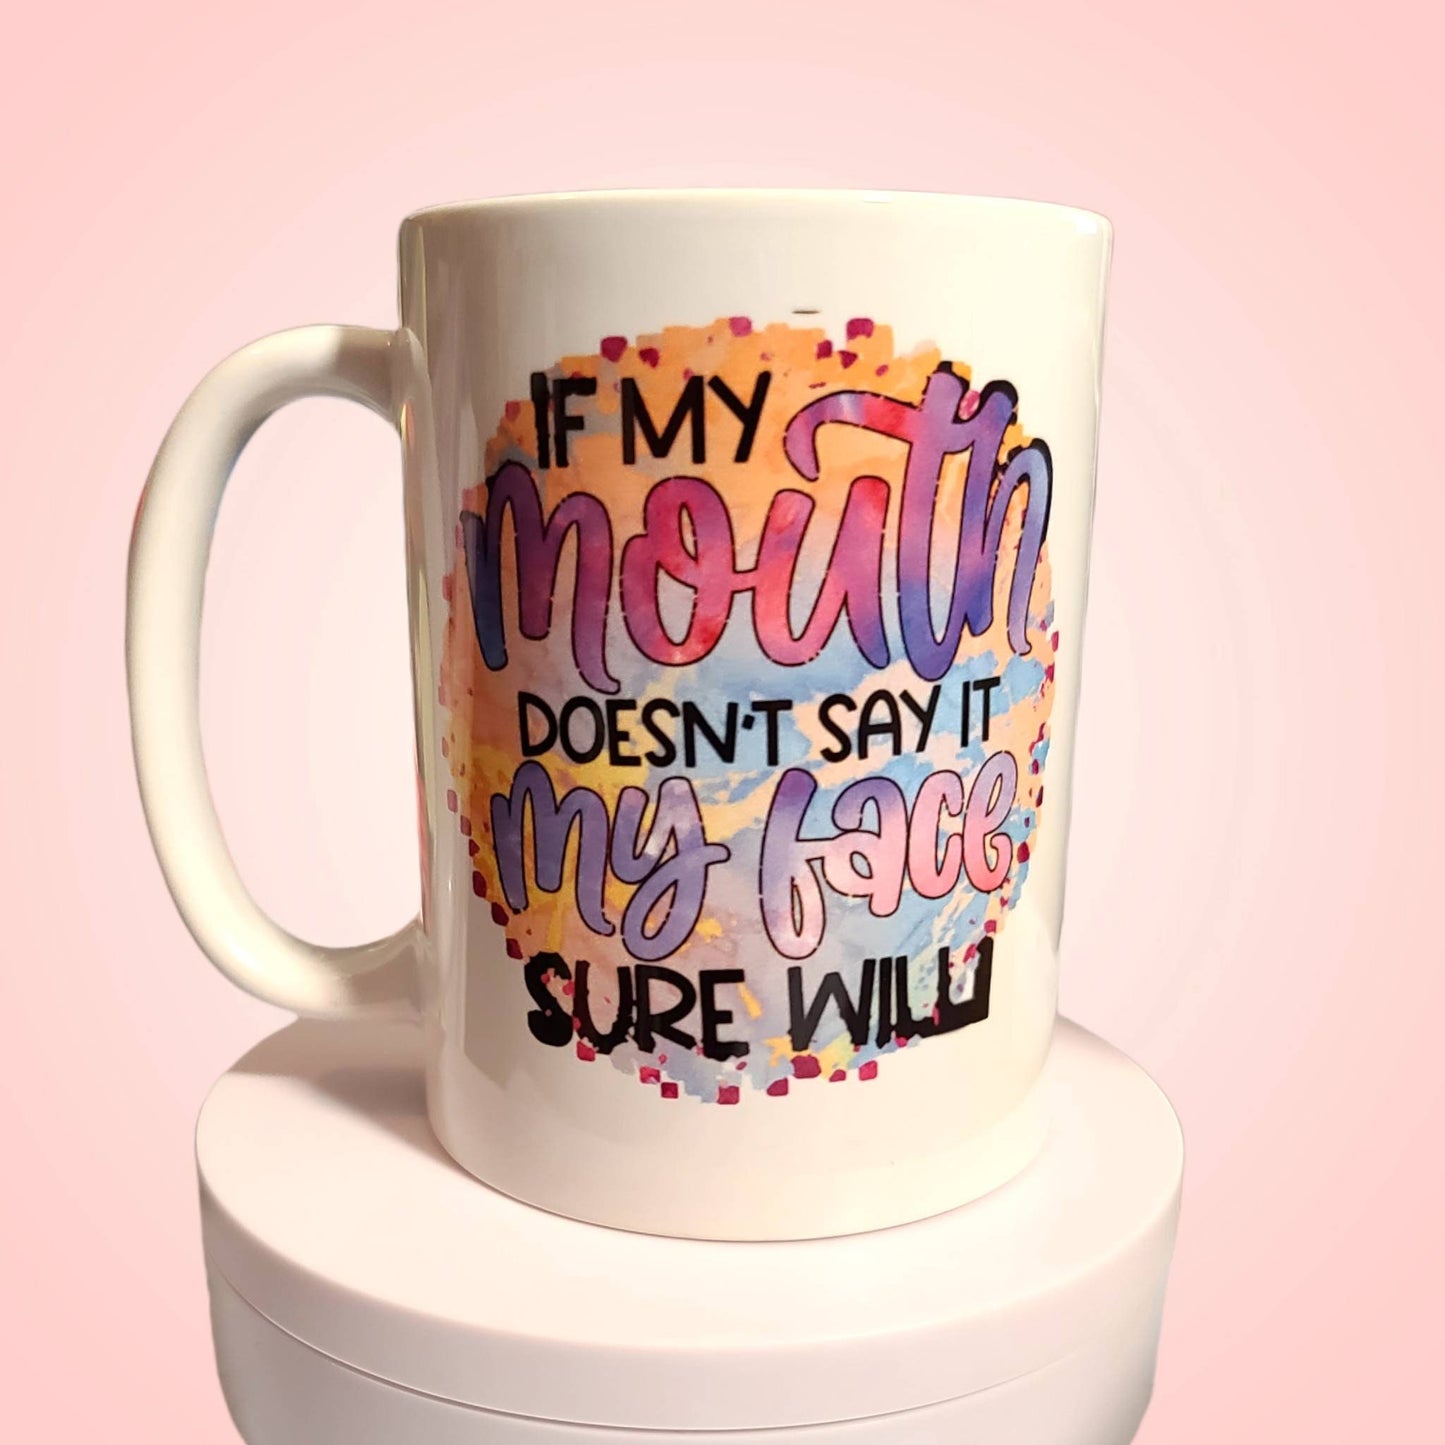 Custom coffee mug with sarcasm or funny saying. Humor cup with personalization option. Drinkware gift. If my Mouth doesn't my face will